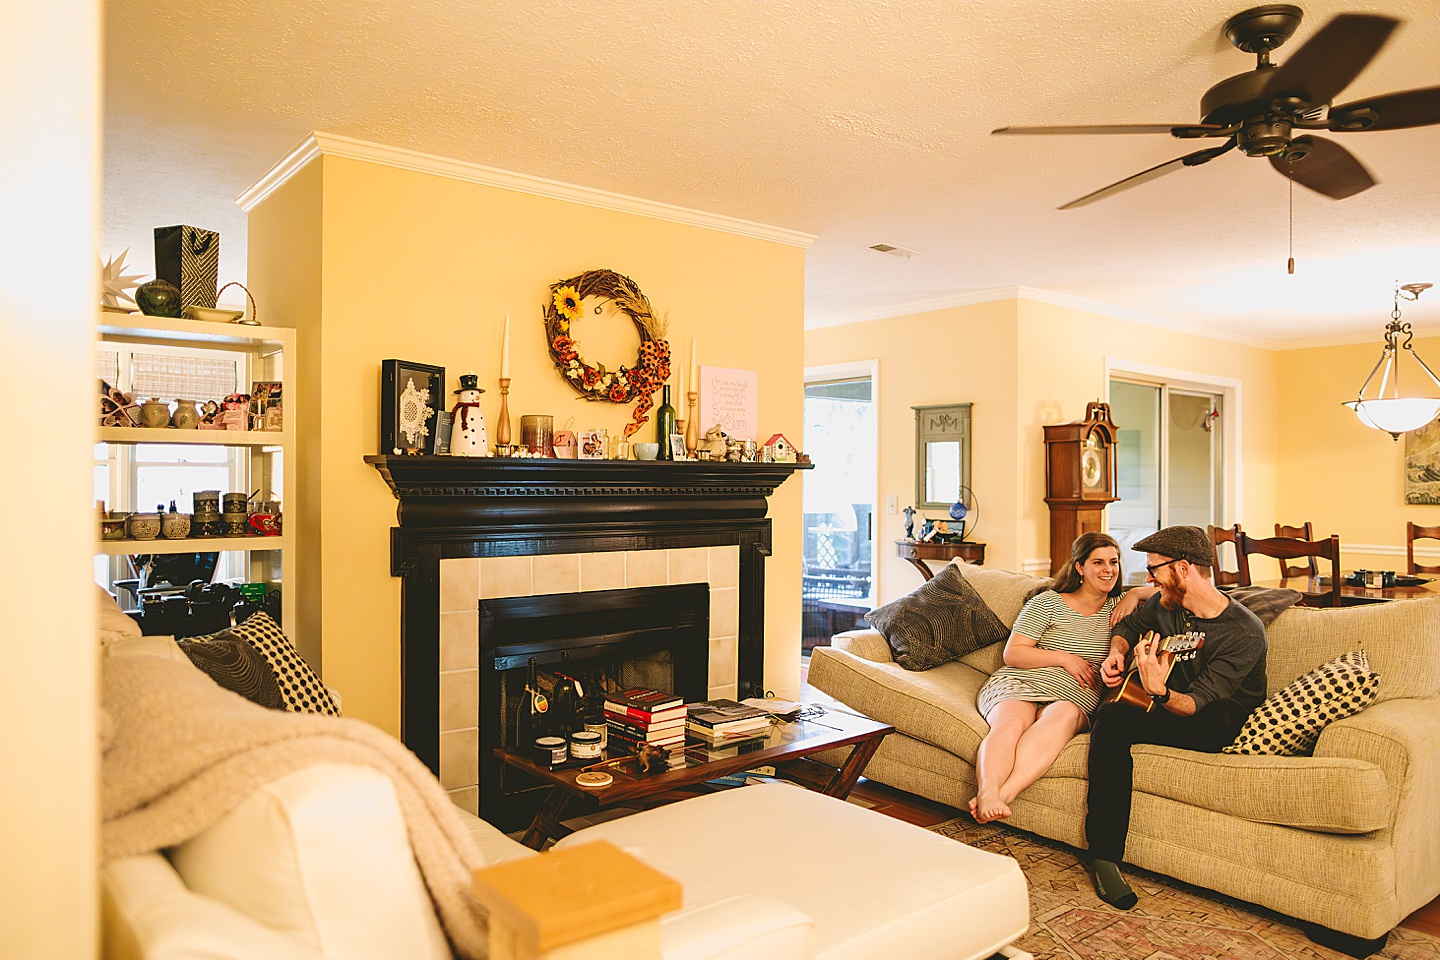 Couple sitting in living room on couch playing guitar